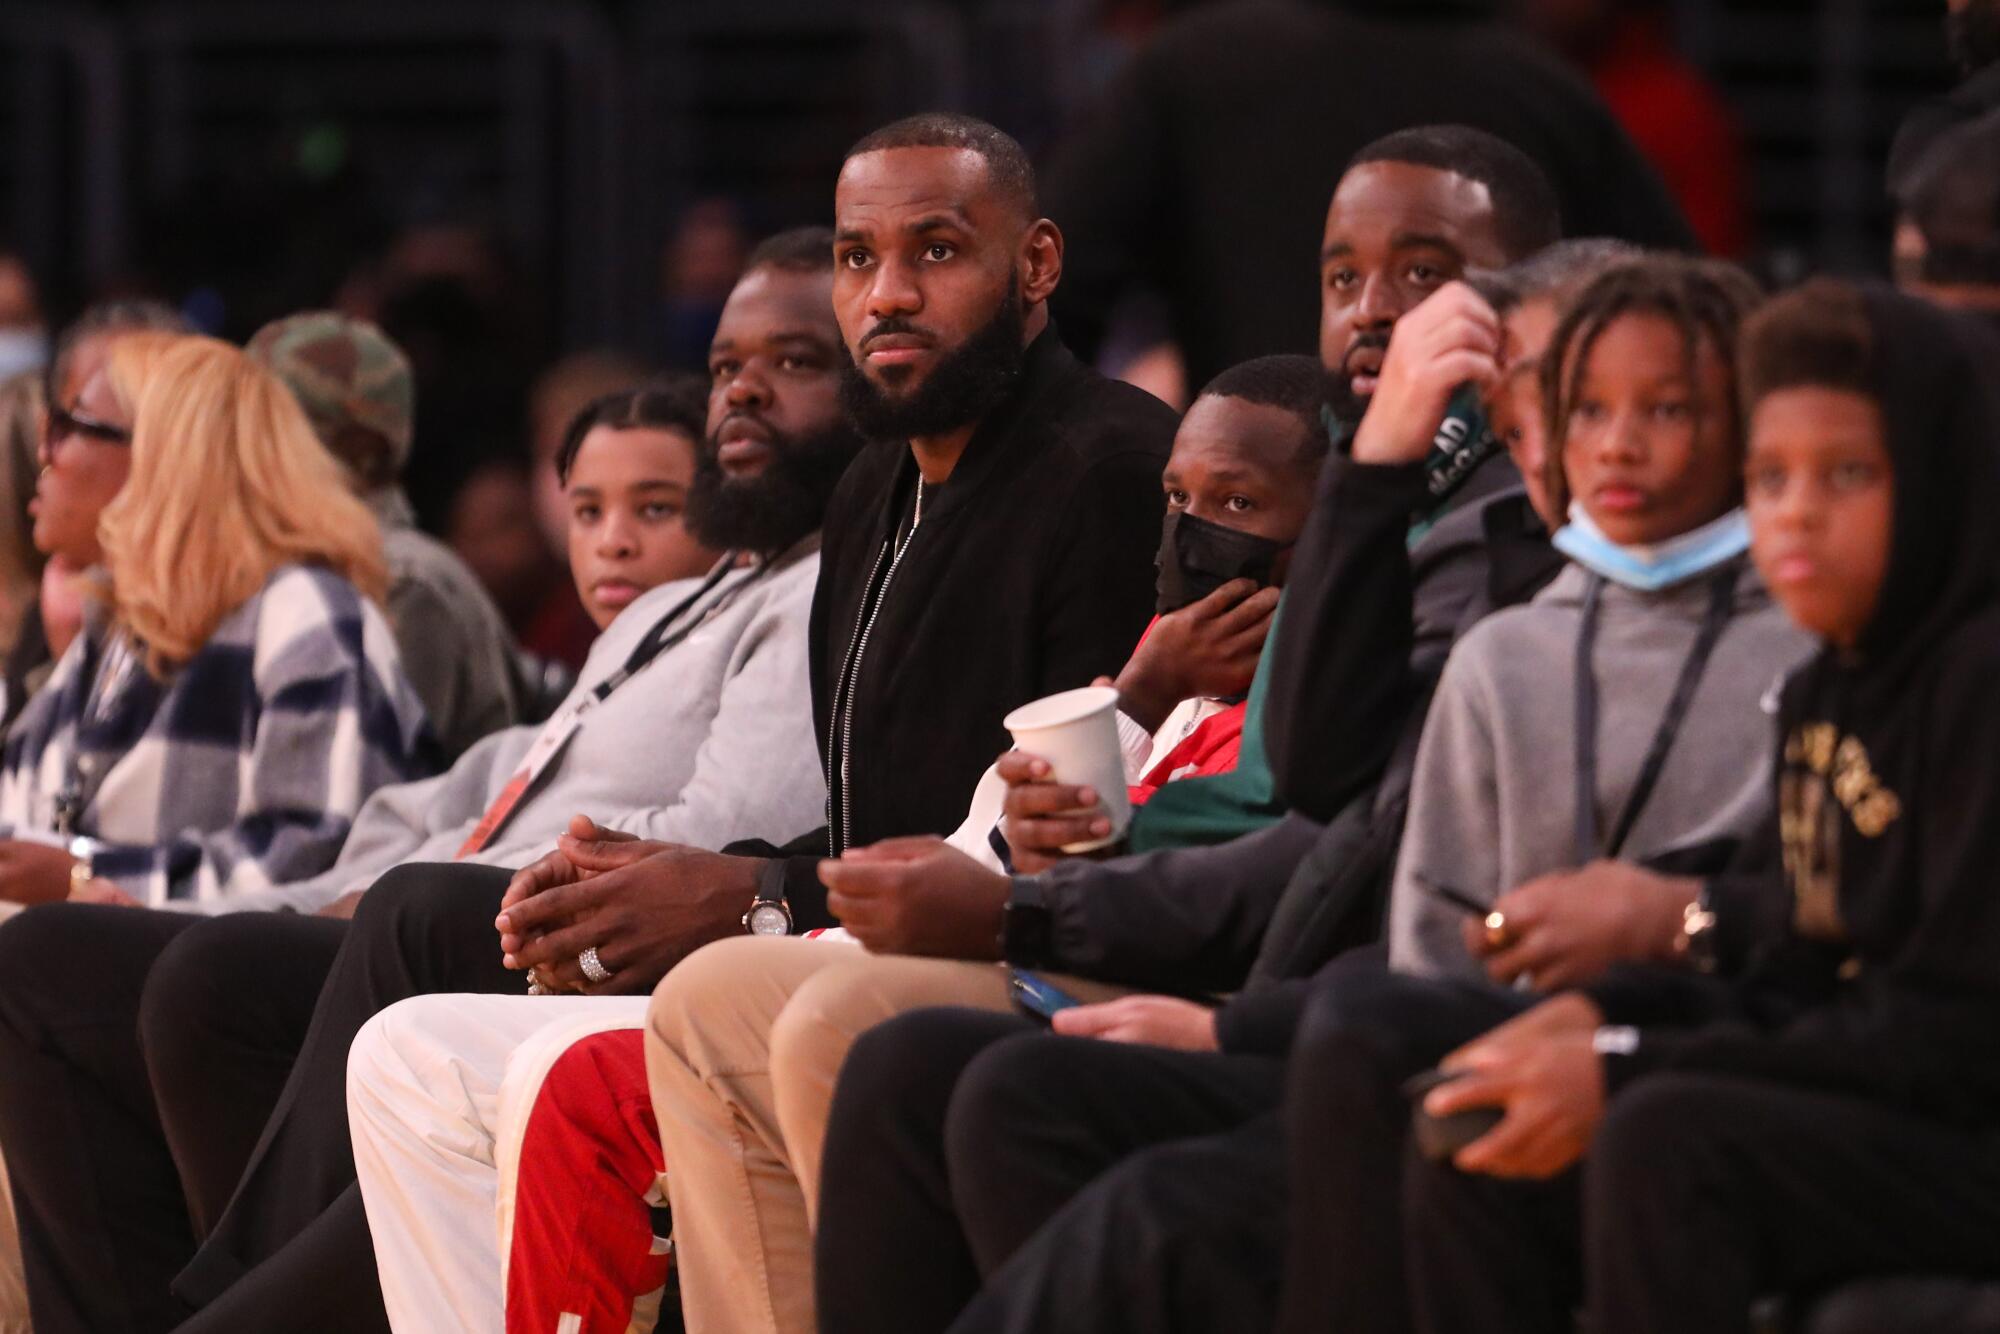 Lebron James watches his son Bronny play for Sierra Canyon in The Chosen-1's Invitational showcase at Staples Center.